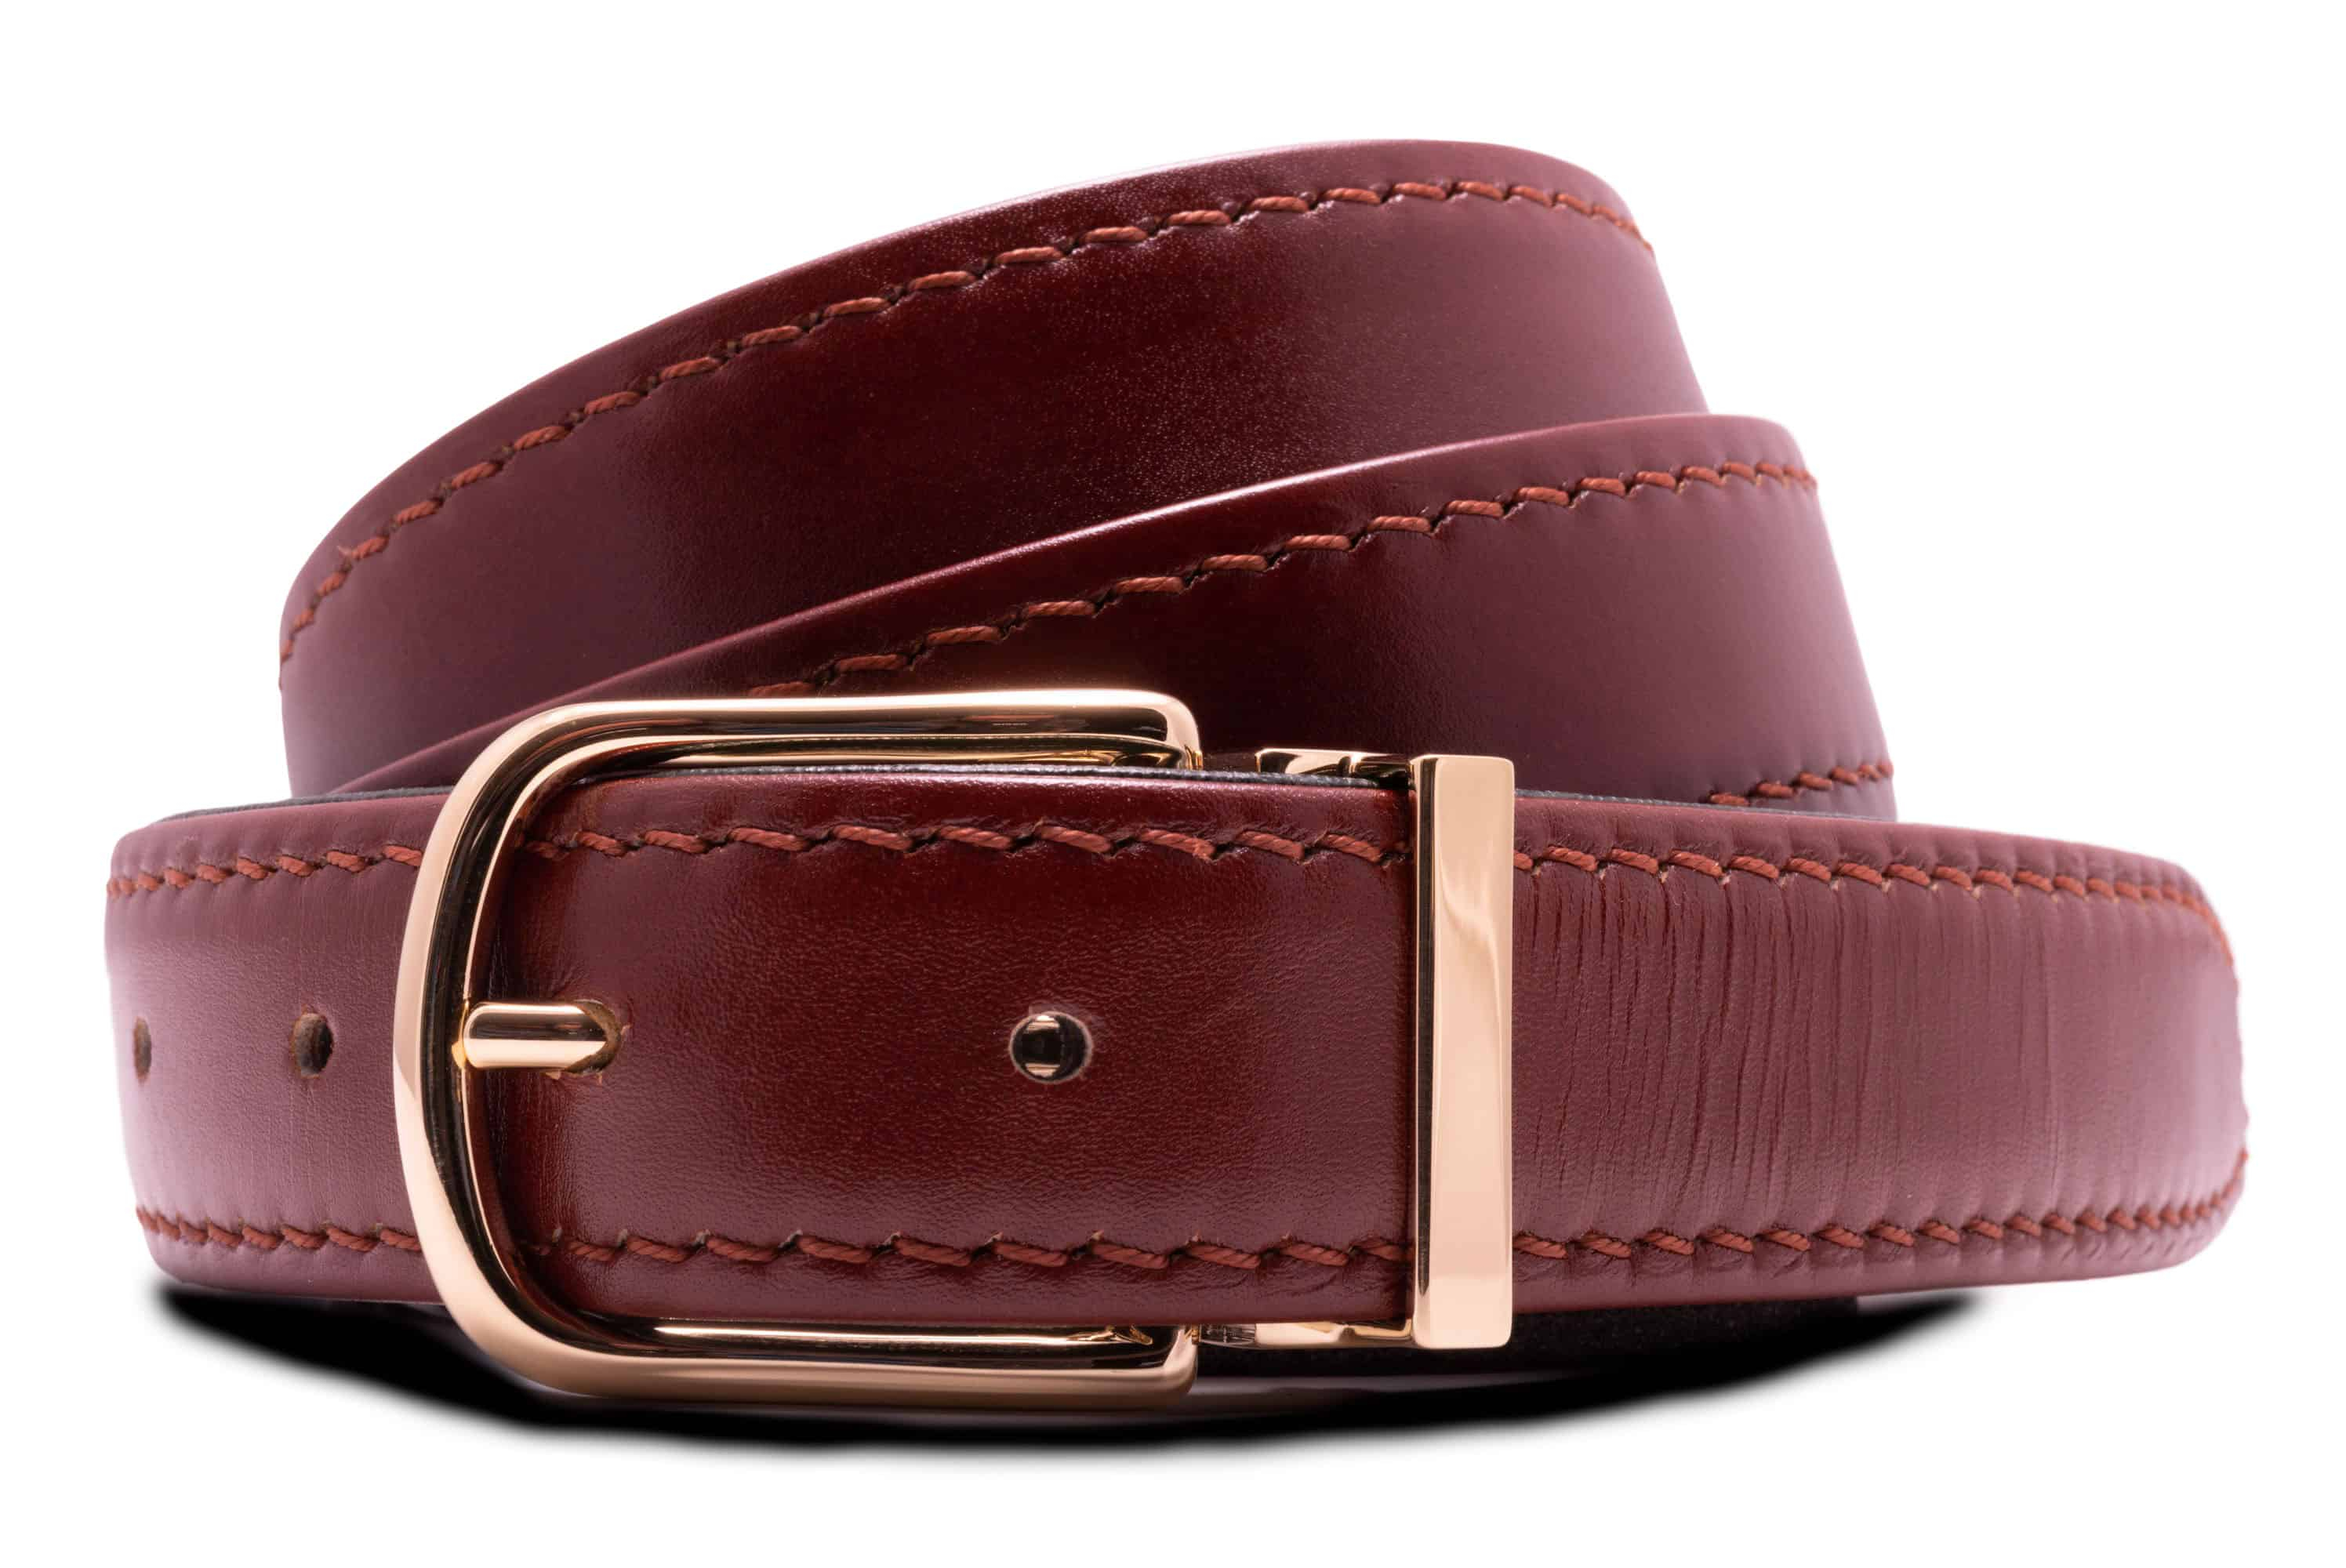 Chestnut Brown Calf Leather Belt Handmade, Aniline Dyed, Saffiano Lining,  Folded Edges by Fort Belvedere